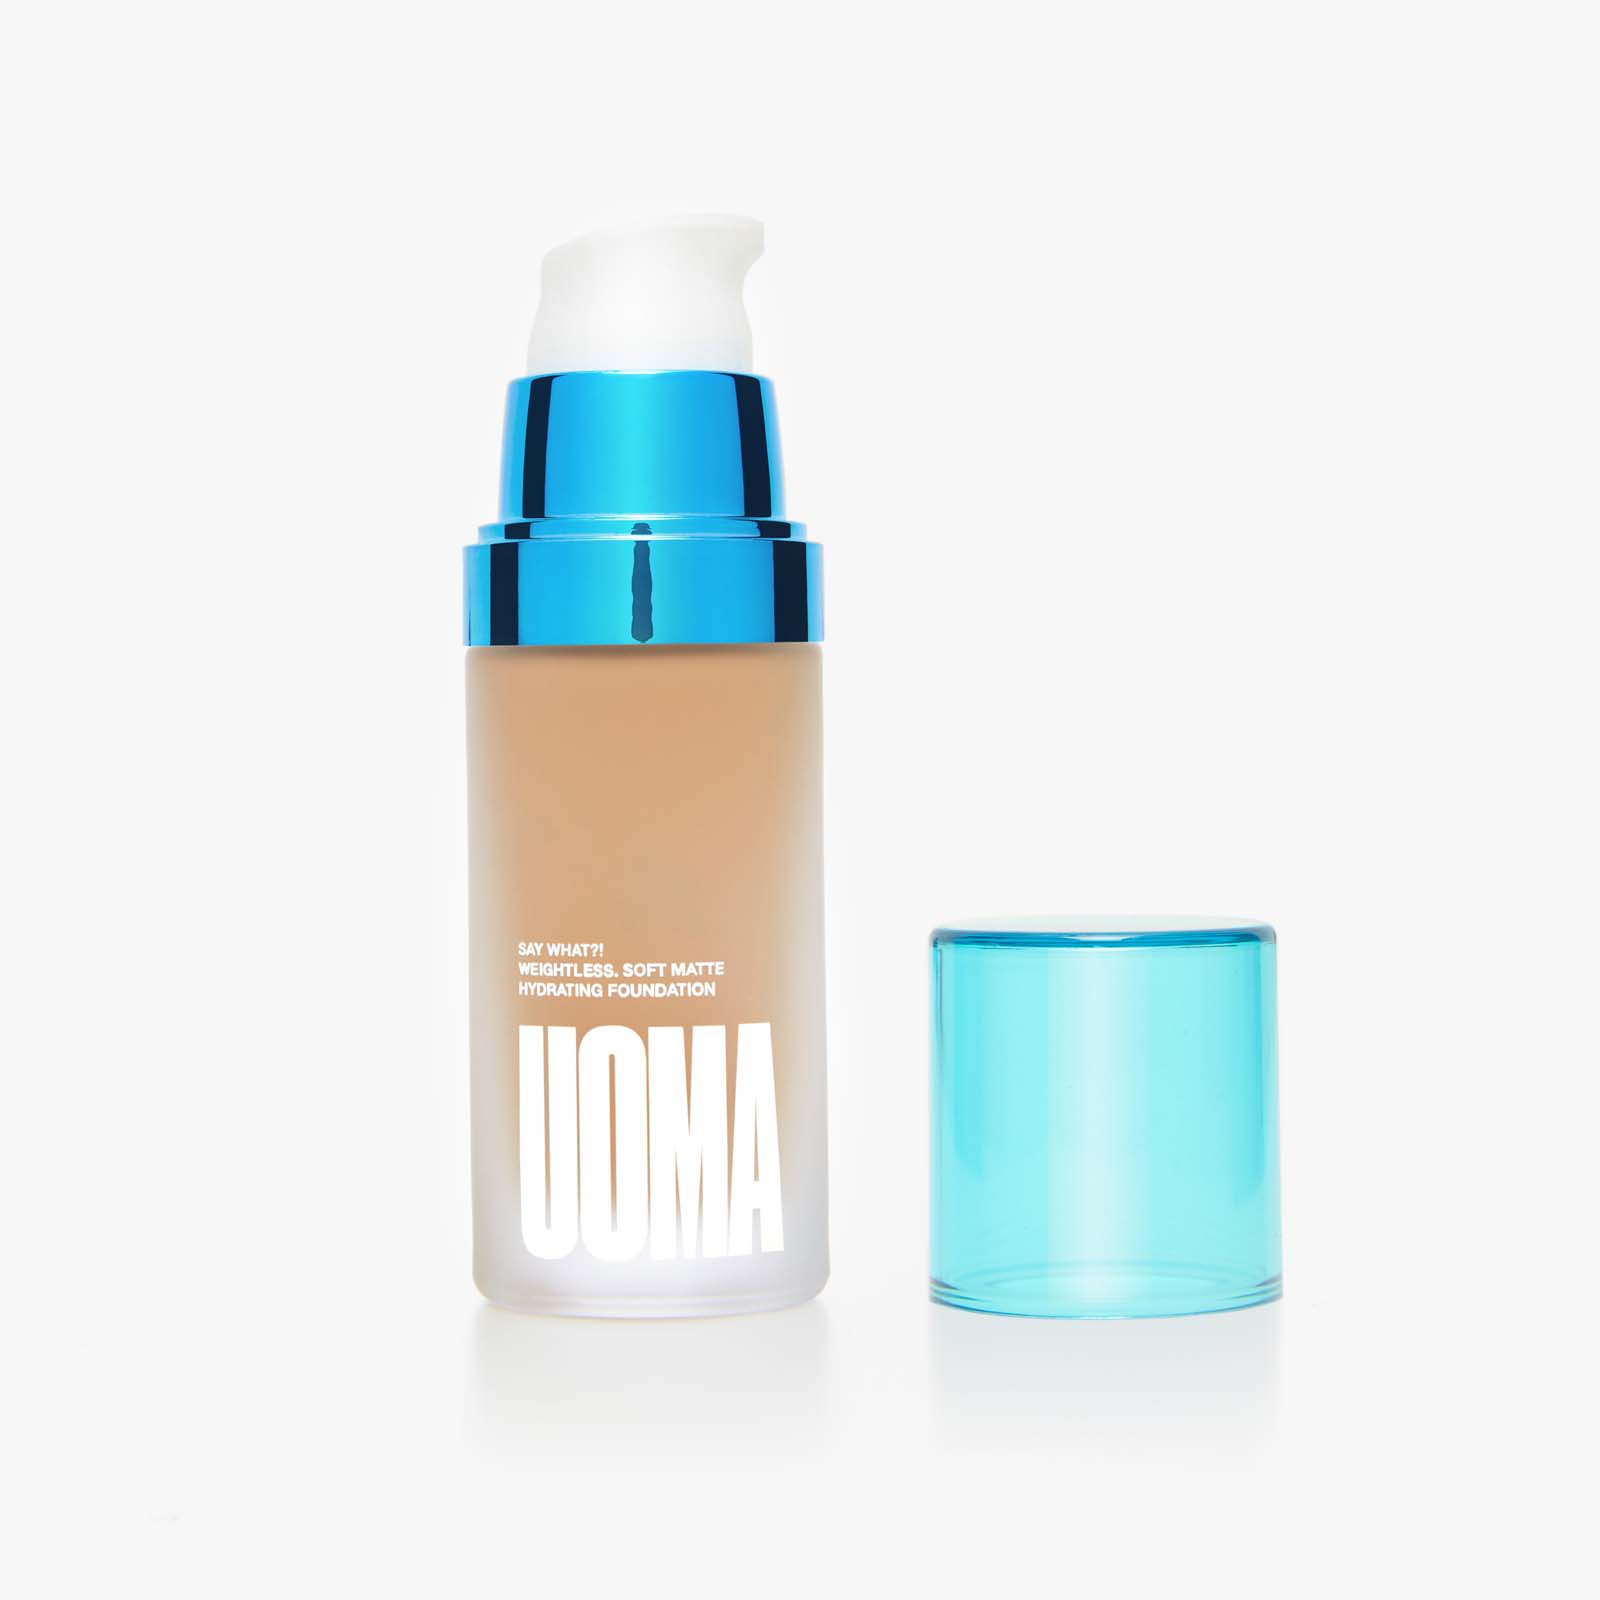 Uoma Beauty Say What?! Weightless Soft Matte Hydrating Foundation 30Ml Fair Lady T2W